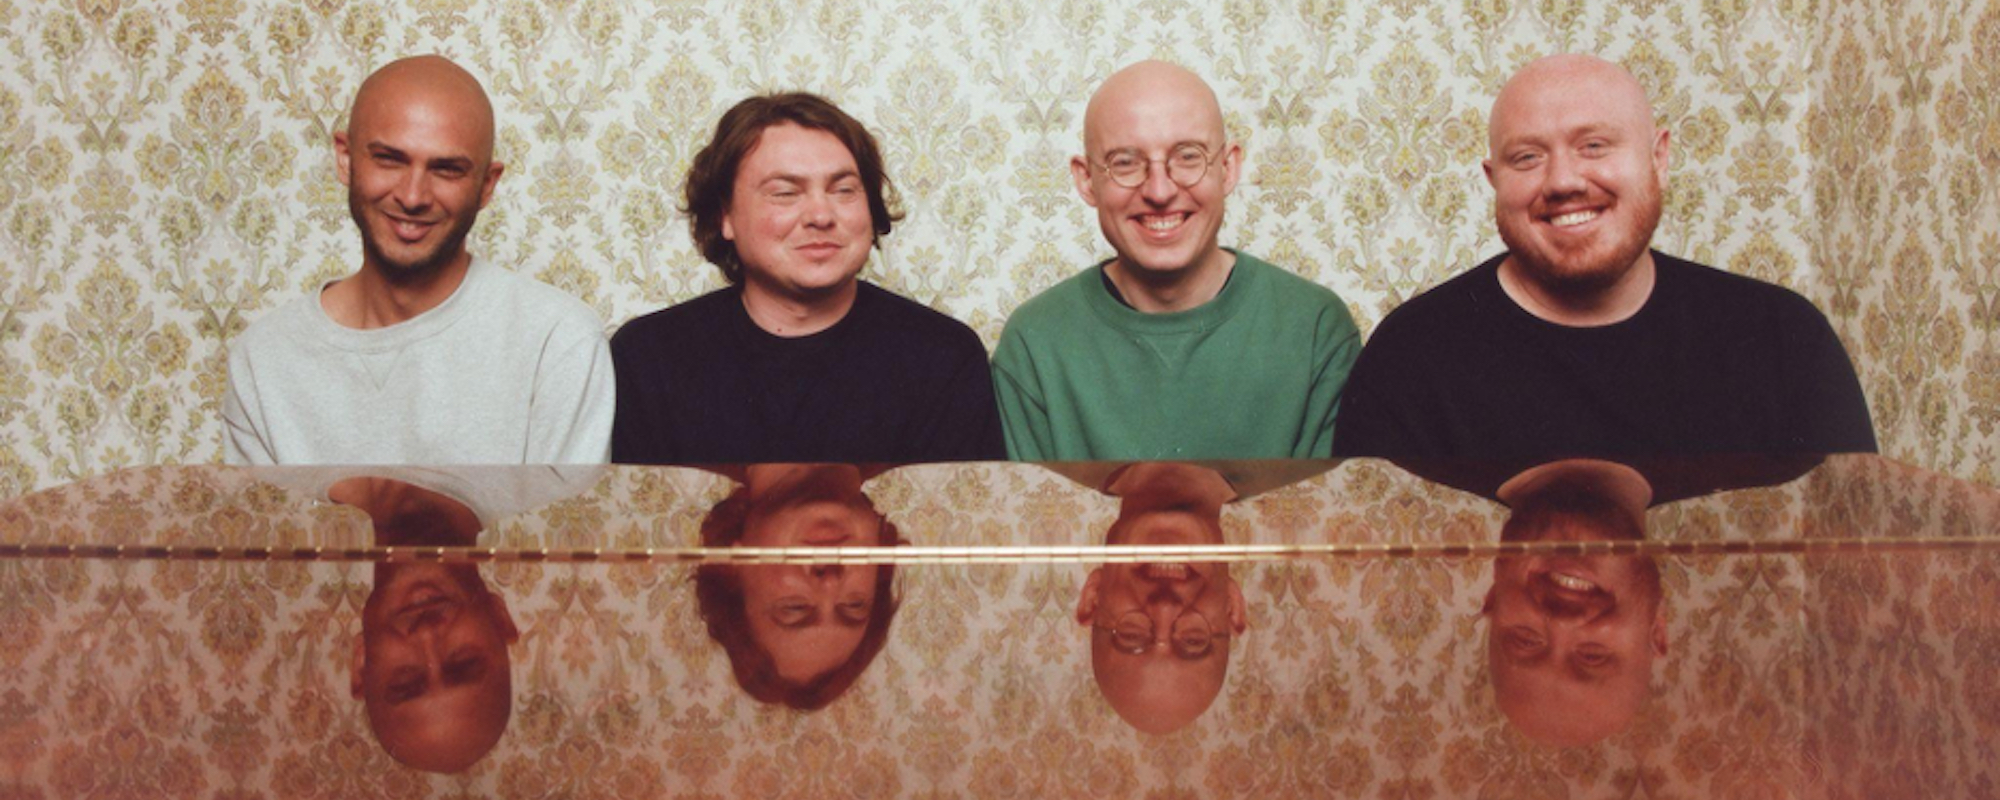 Bombay Bicycle Club Share Psychedelic New Single “I Want to Be Your Only Pet”